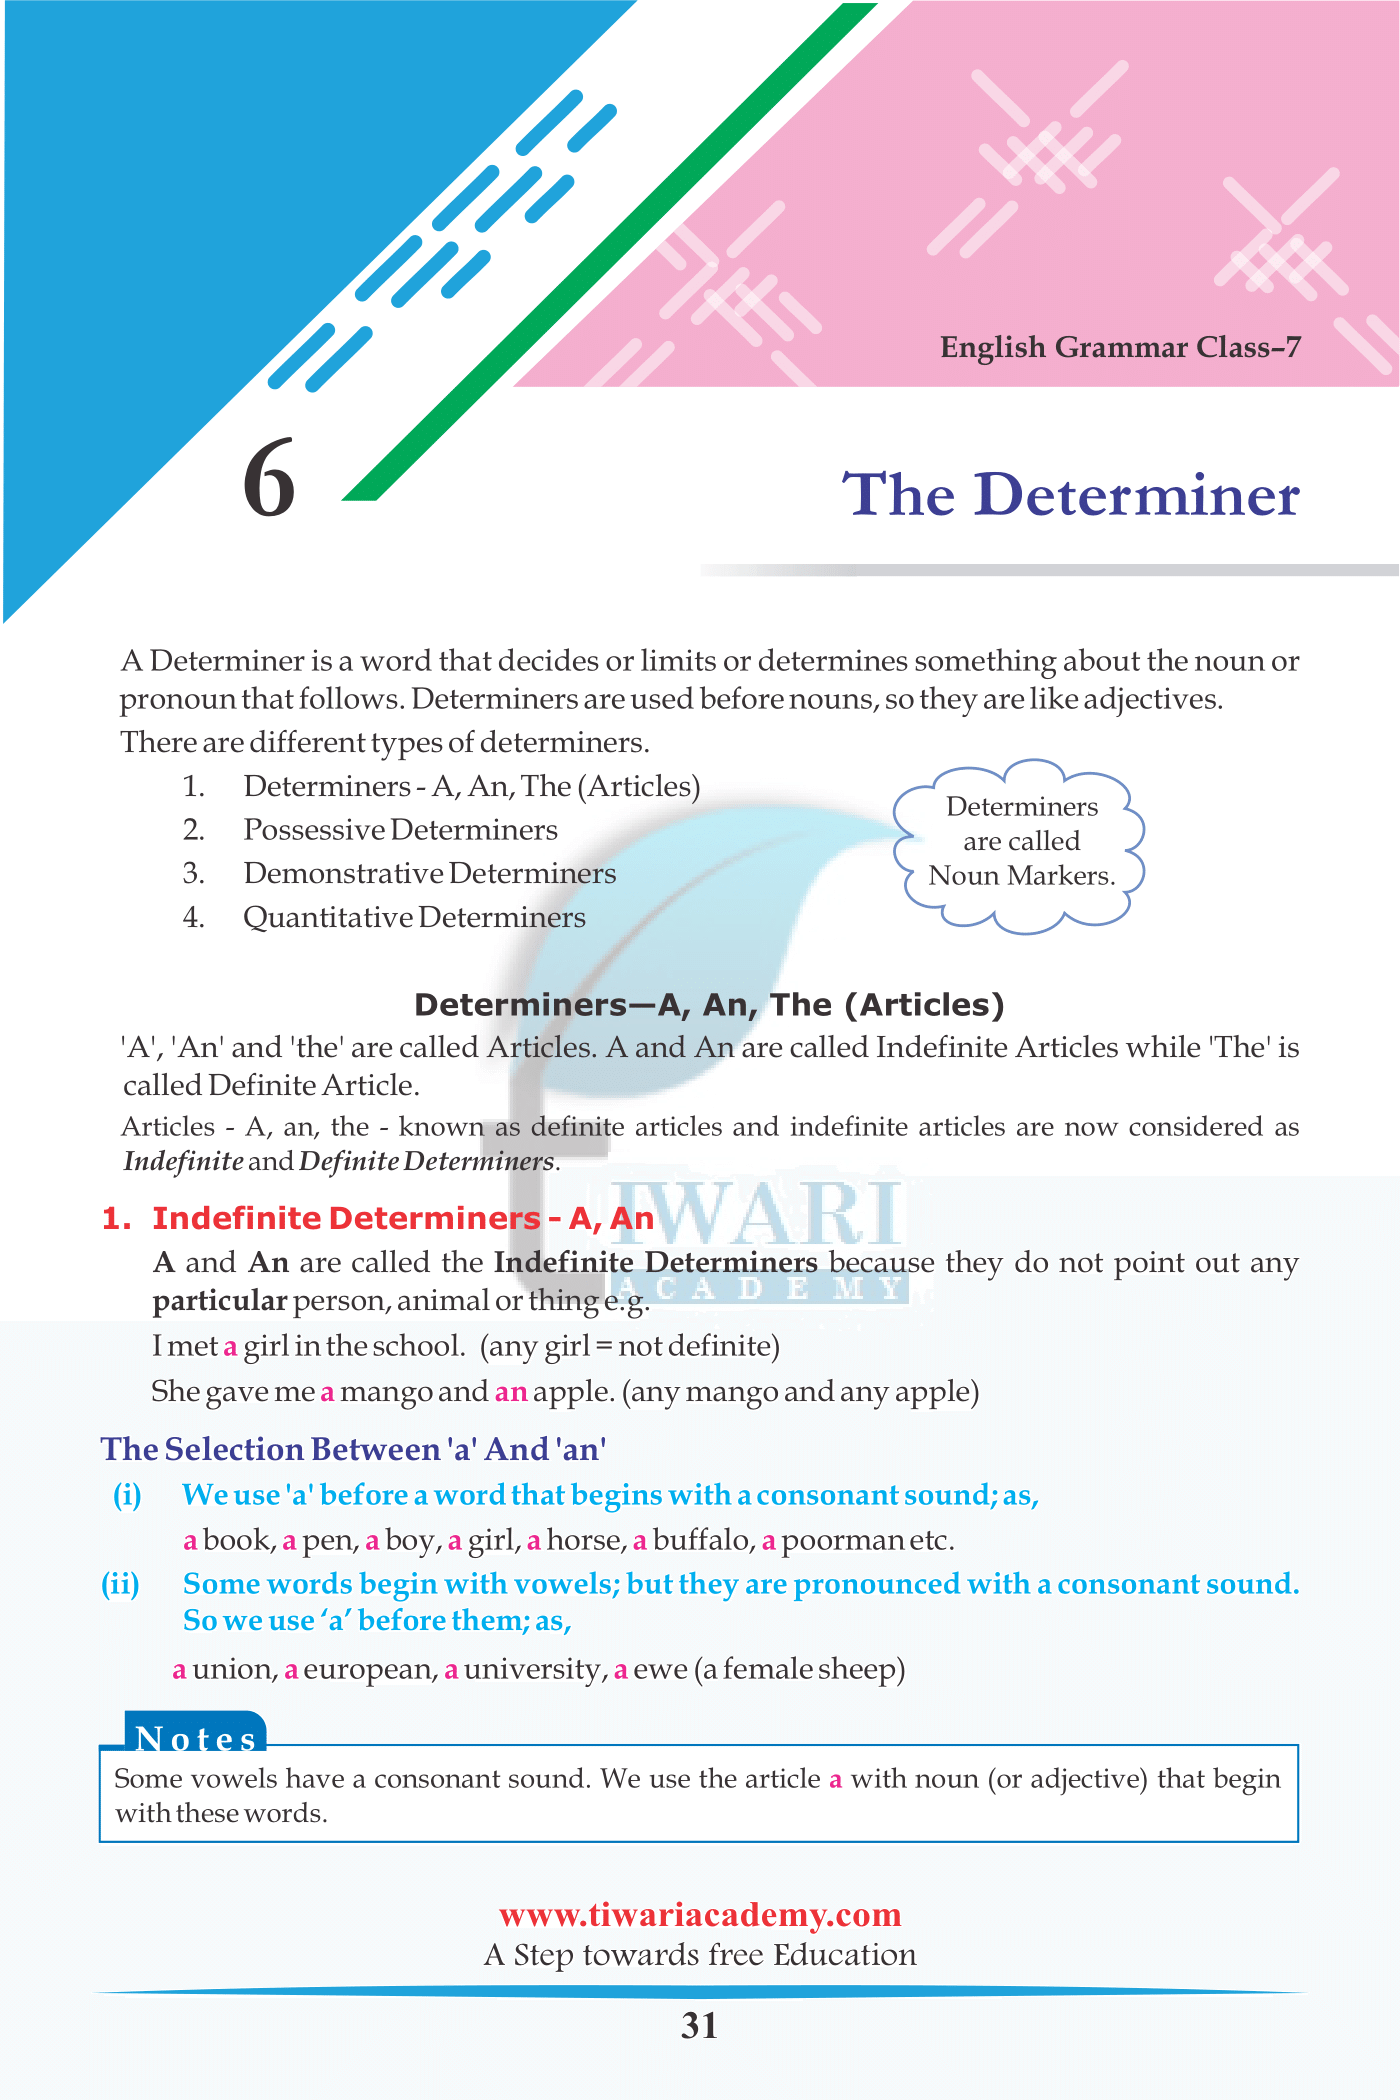 Class 7 English Grammar Chapter 6 The Determiner with example